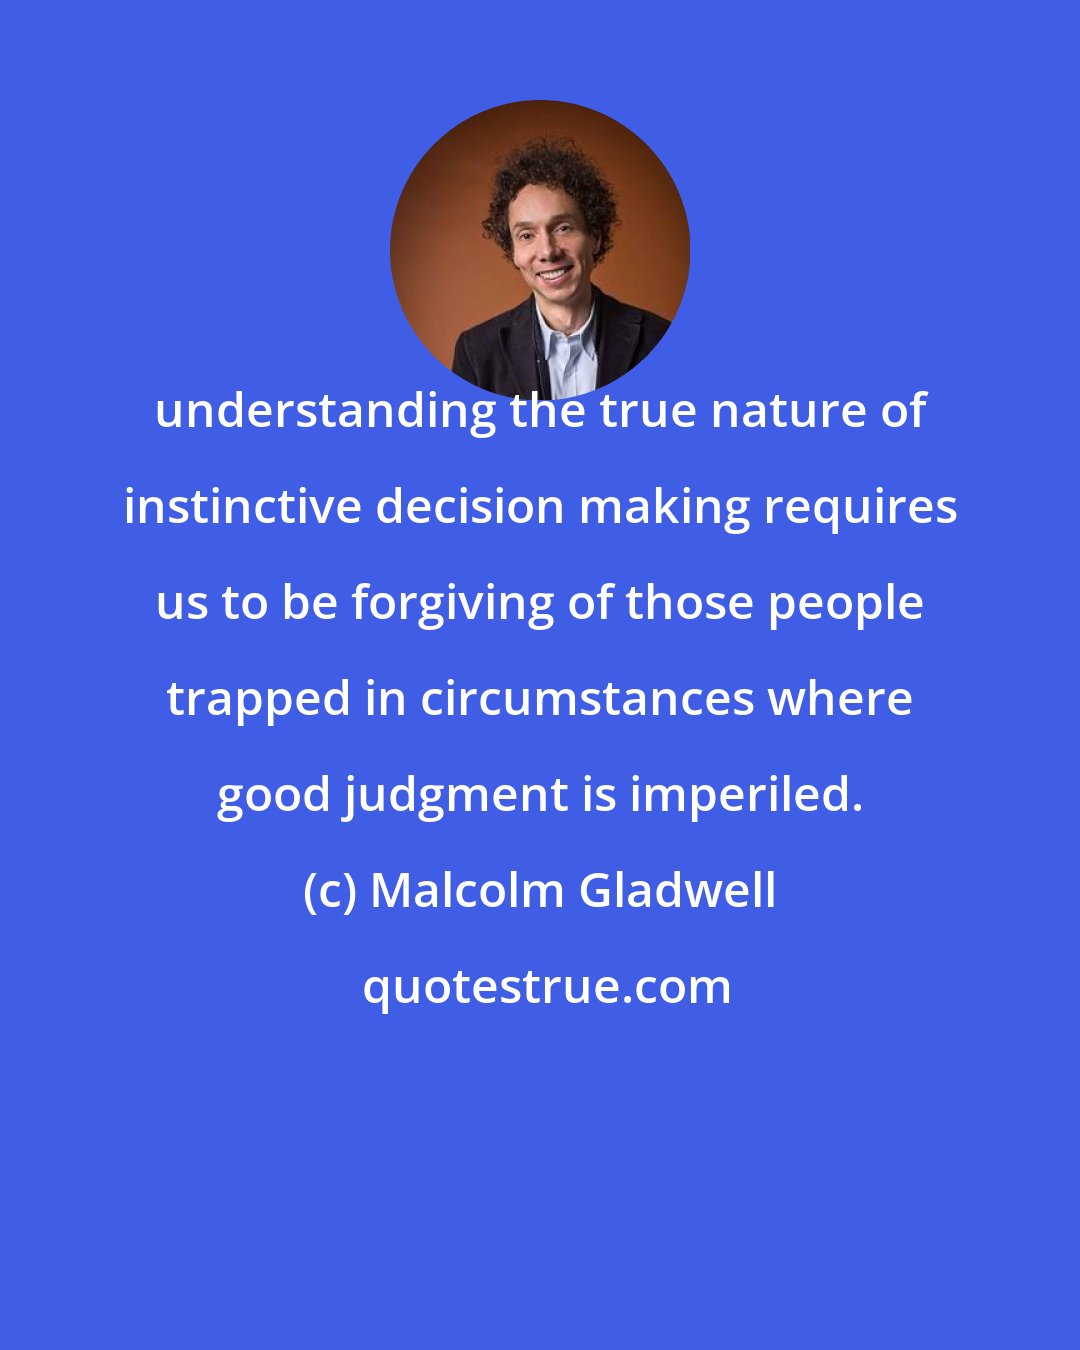 Malcolm Gladwell: understanding the true nature of instinctive decision making requires us to be forgiving of those people trapped in circumstances where good judgment is imperiled.